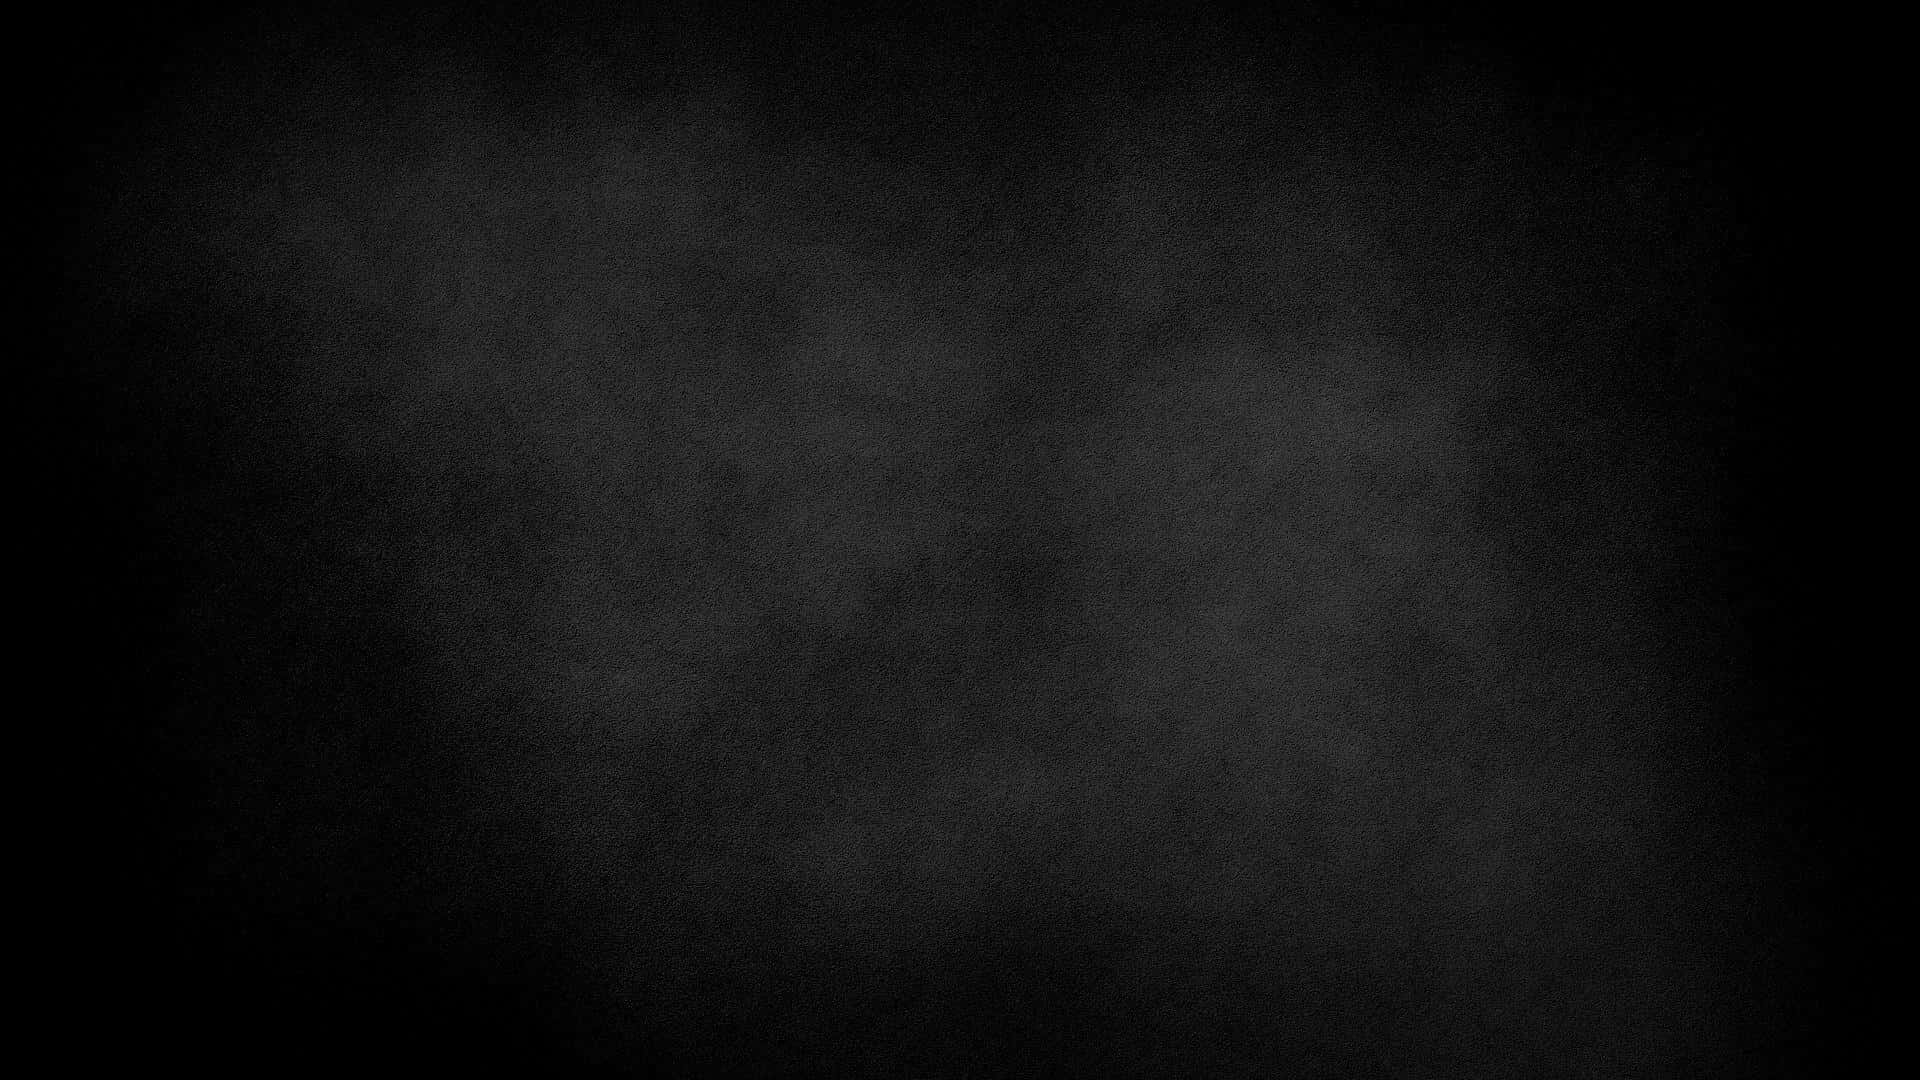 Bold and Edgy Black Grunge Texture Wallpaper